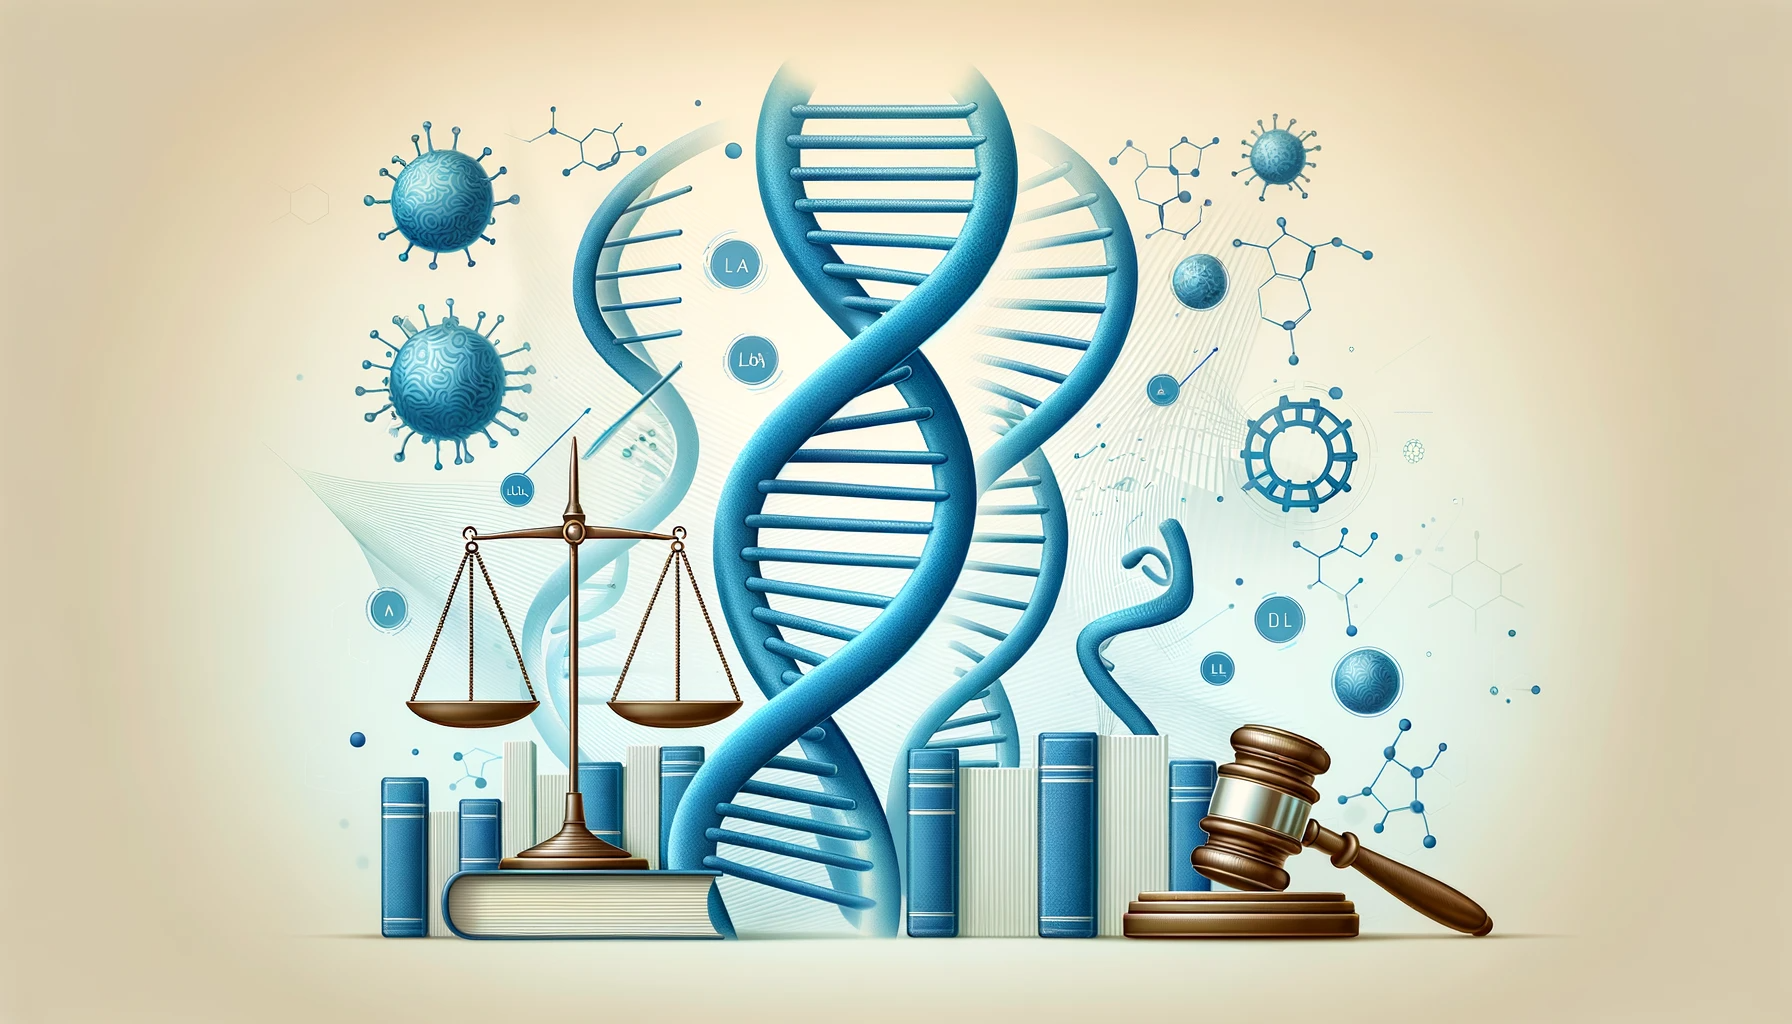 Protecting Innovation: The Tumultuous History and Uncertain Future of Biotechnology and Patents